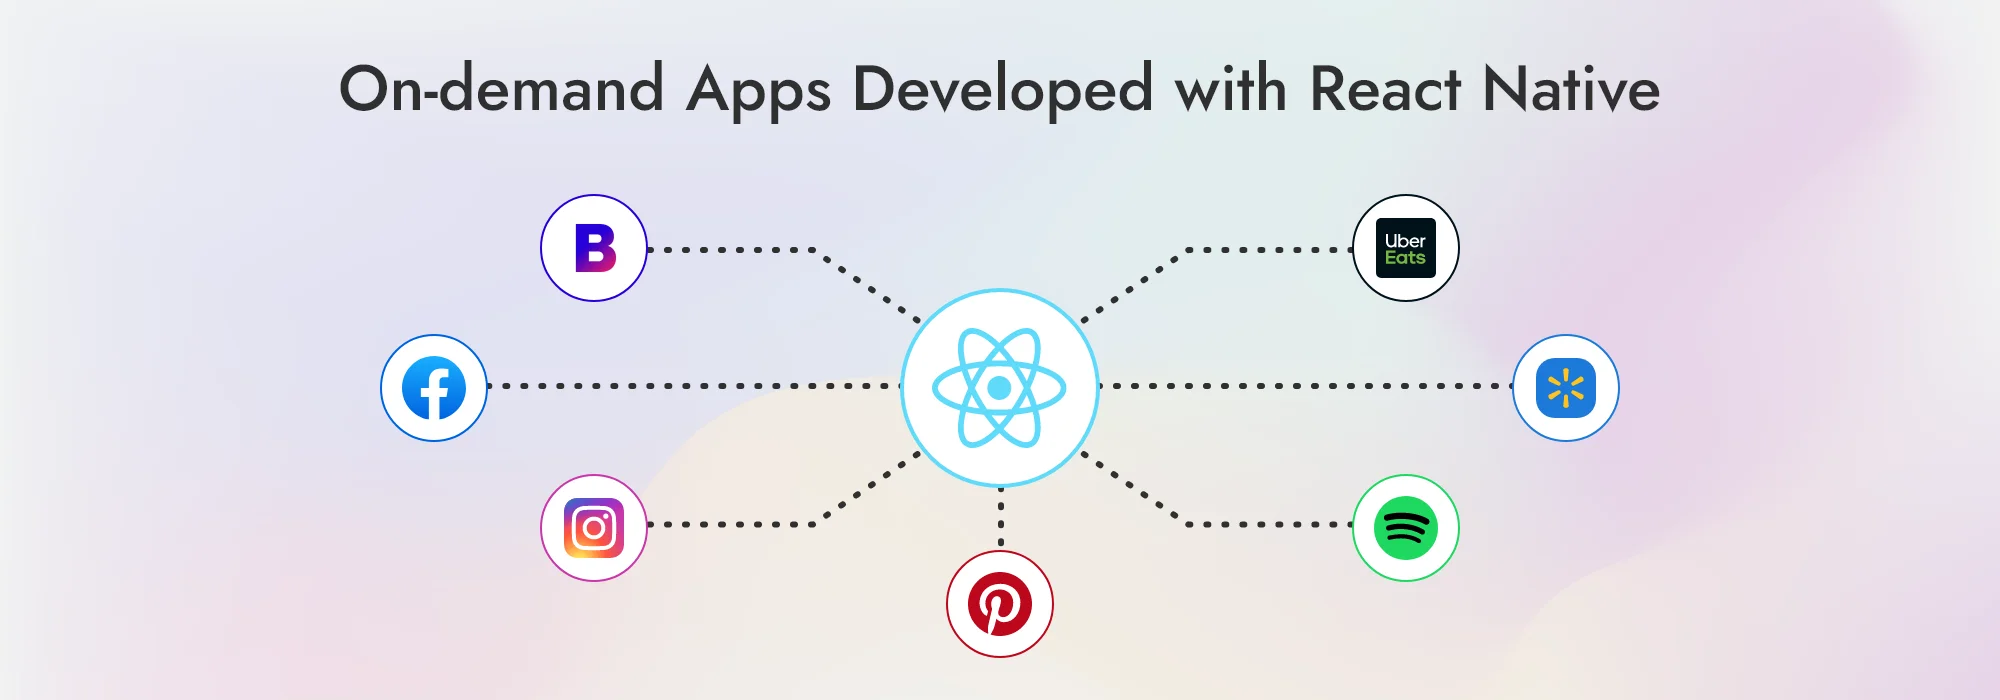 On-demand Apps Developed with React Native